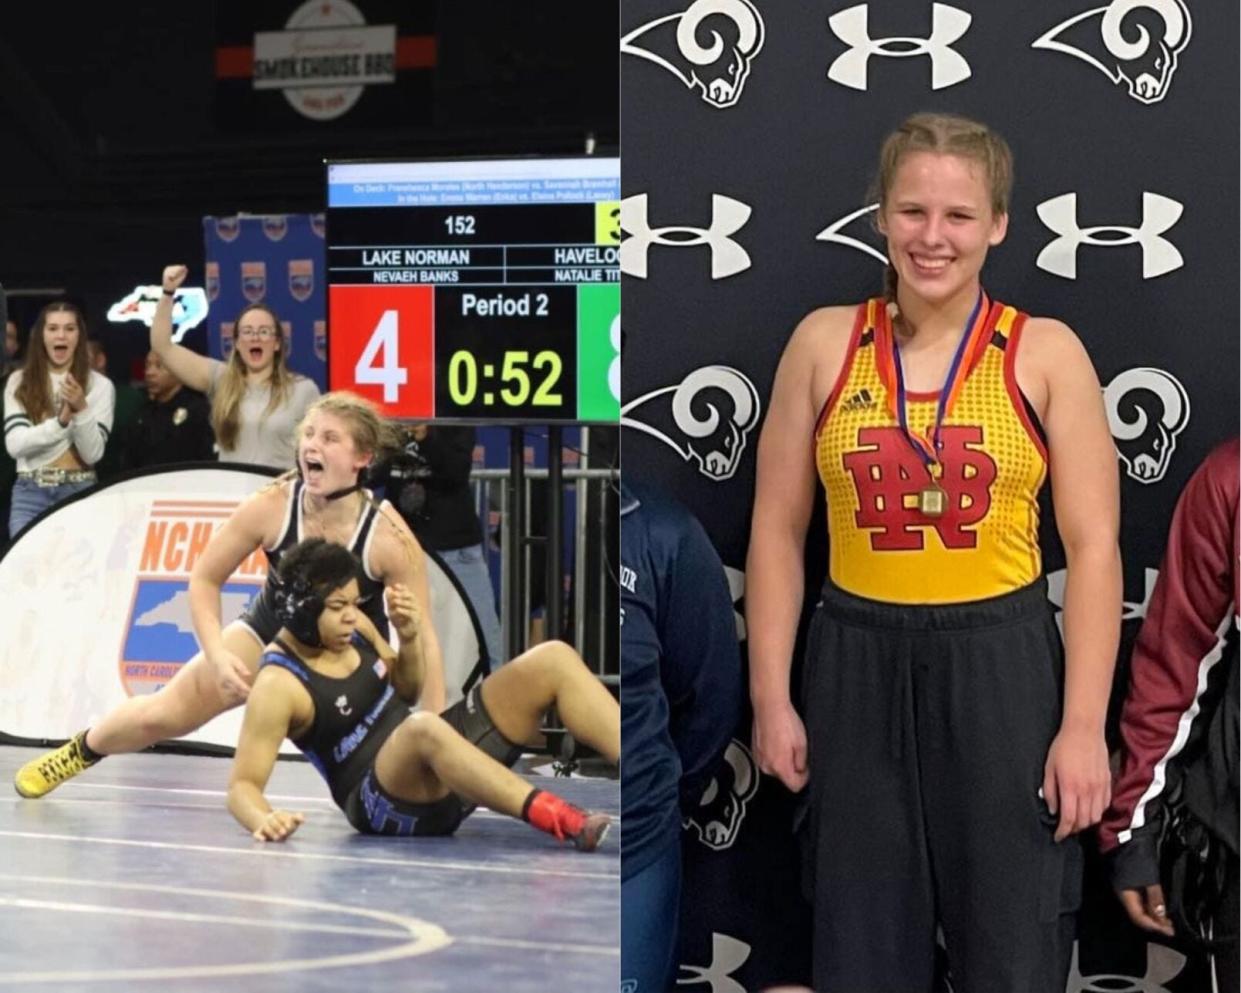 Havelock High School’s Natalie Titus (left) recently earned the 152 lb. state title and New Bern wrestler Faith Bane (right) was the lone New Bern wrestler this past season coming within one match of placing at the recent Girls State Invitational Wrestling Tournament.